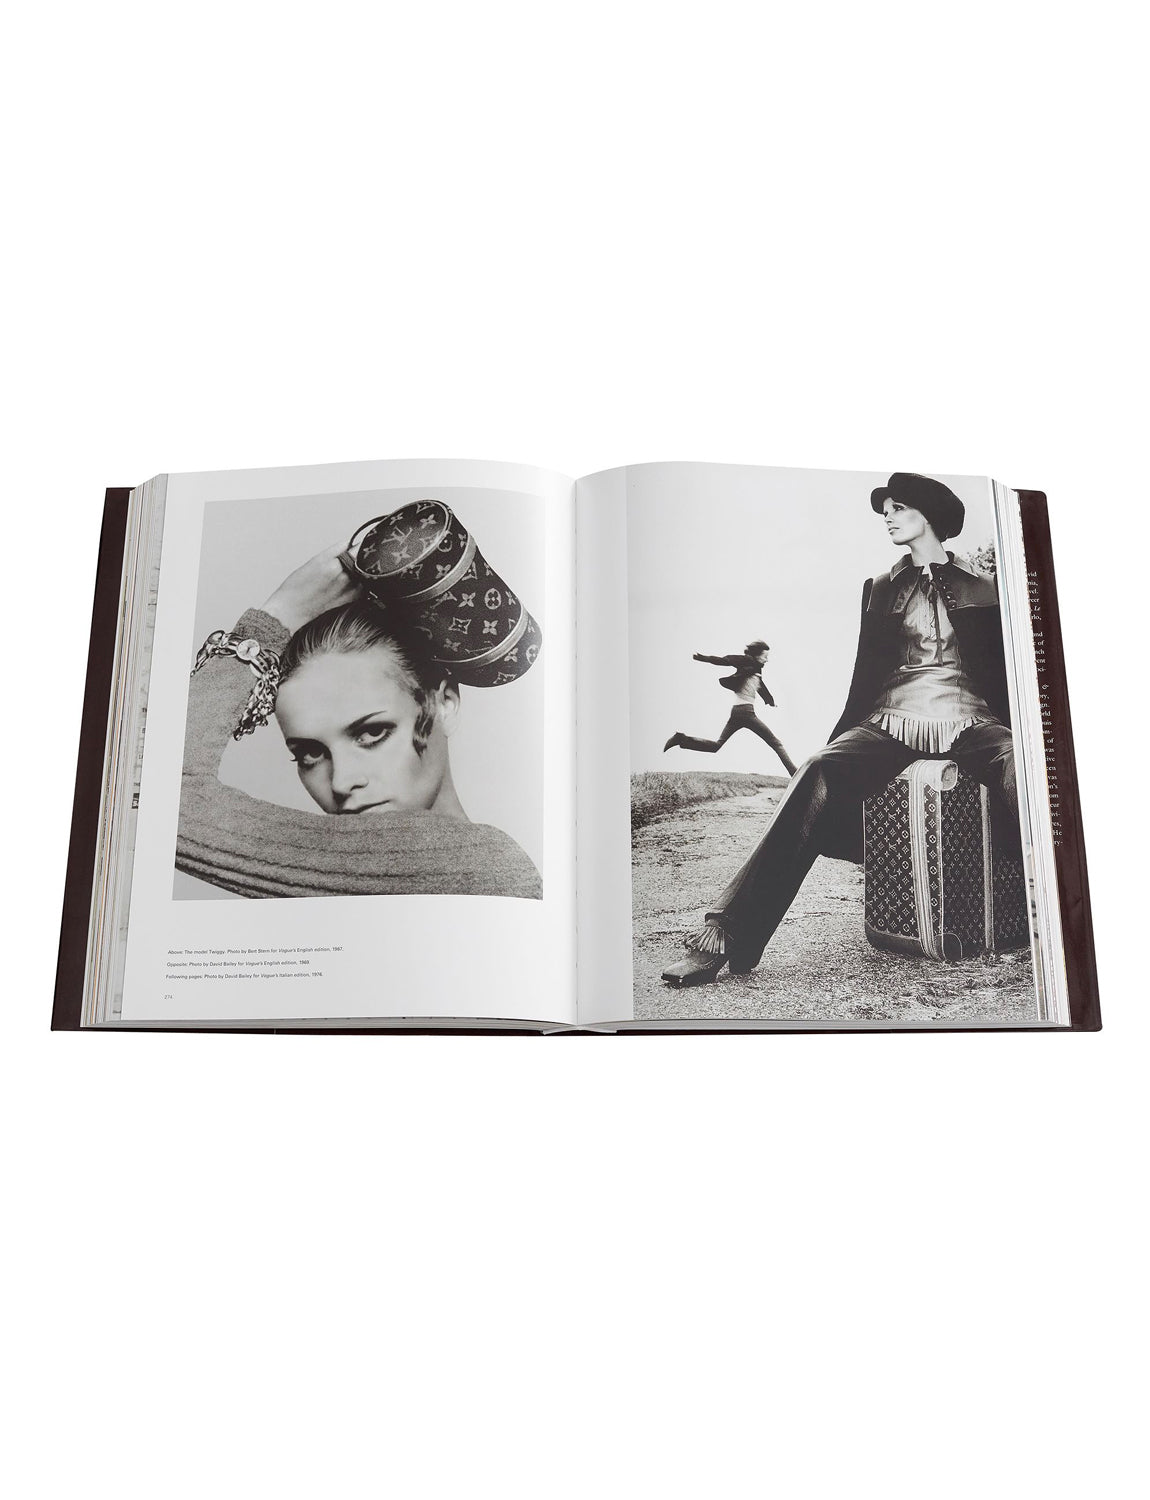 NEW Louis Vuitton : The Birth of Modern Luxury by Paul-Gerard Pasols Book